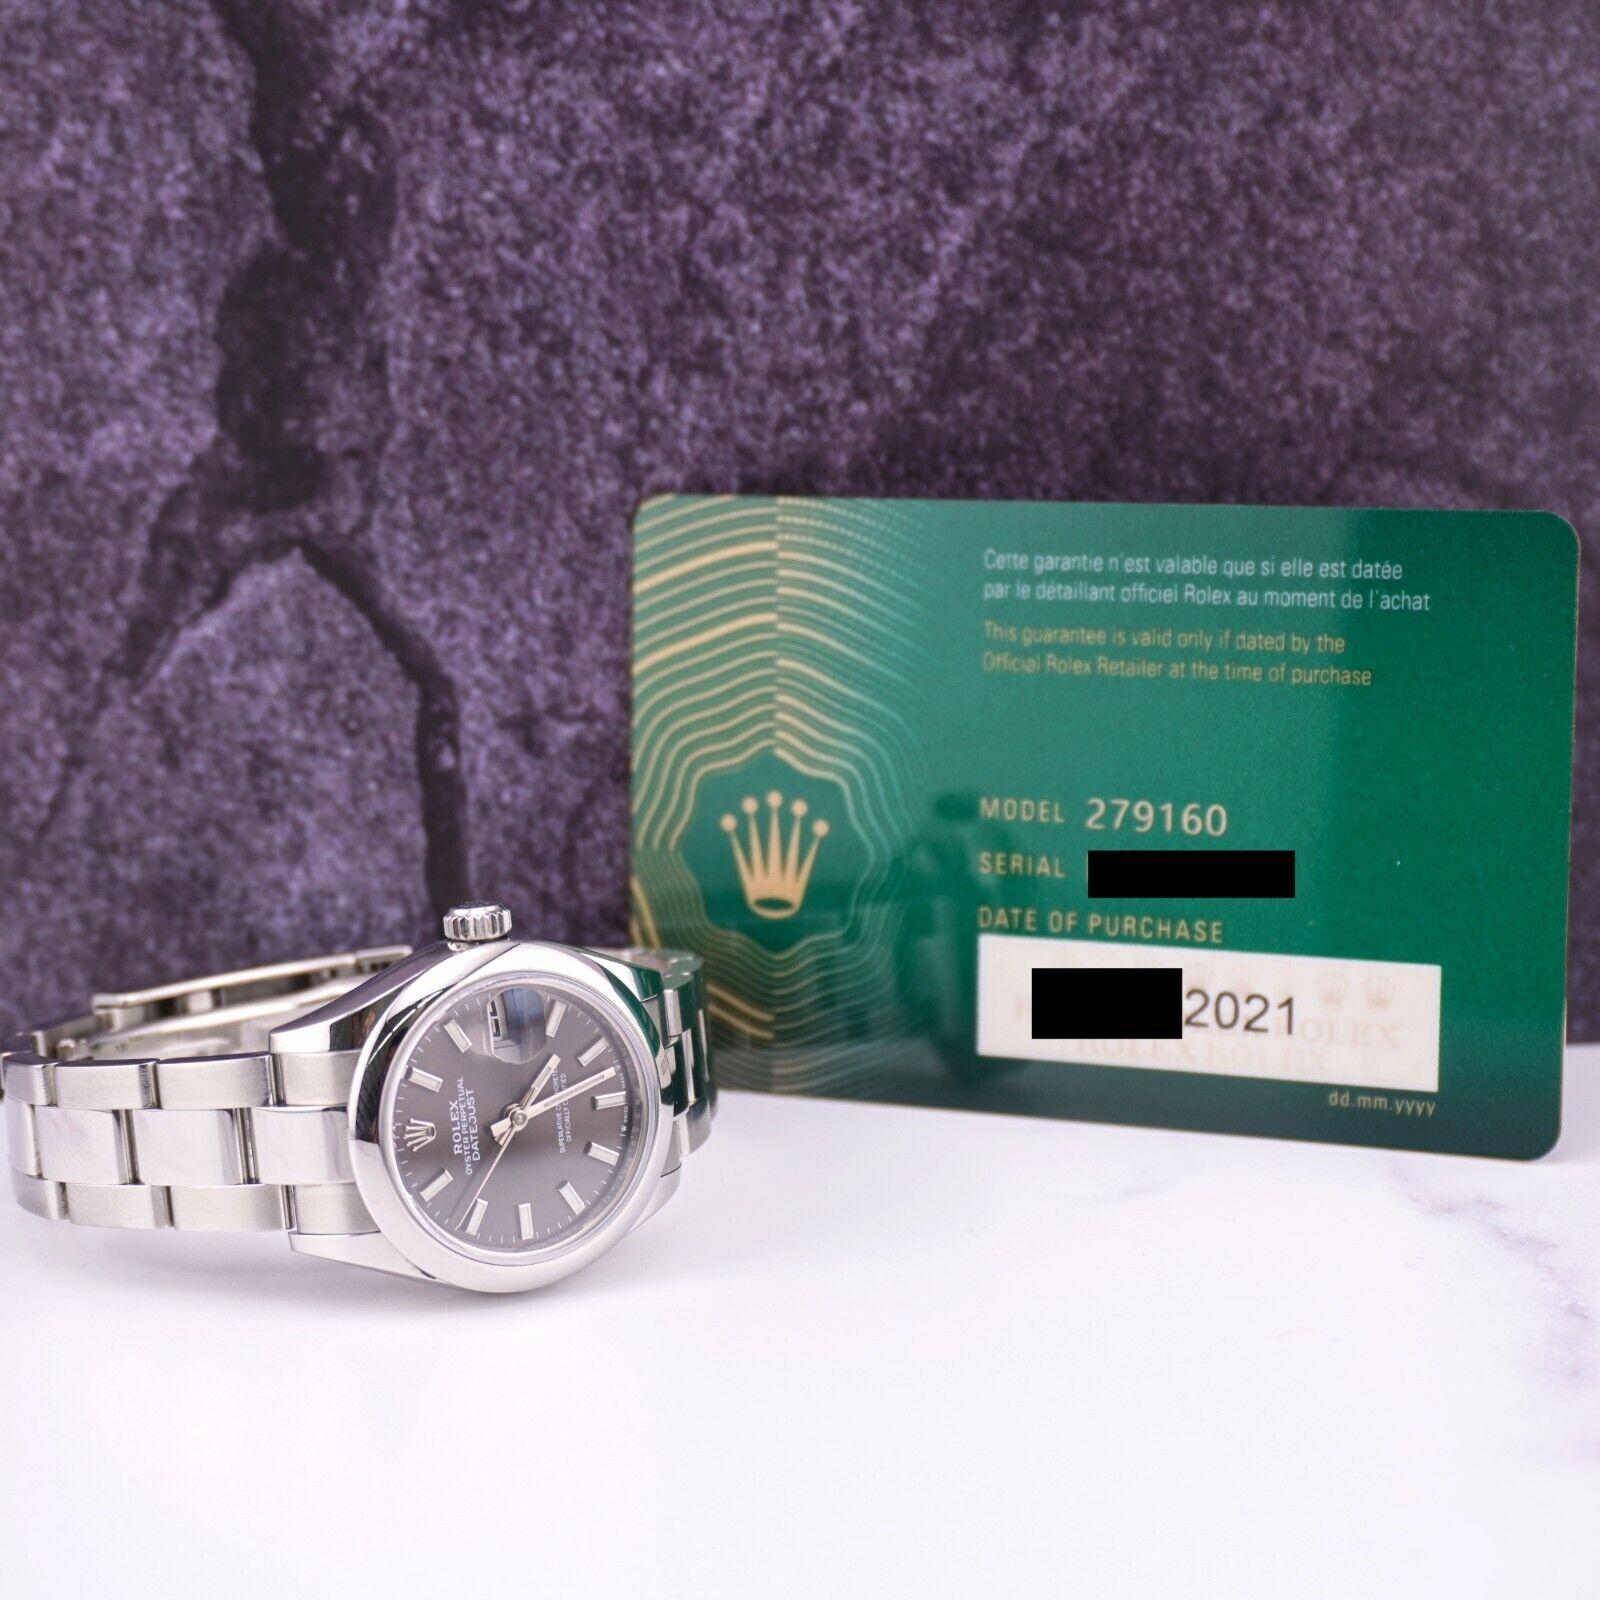 Rolex Datejust 28mm Watch

Pre-owned w/ Original Box and Papers
100% Authentic, Swiss Ice Certificate of Value & Authenticity Card
Condition - (Excellent Condition) - See Pics
Watch Reference - 279160
Model - Datejust
Dial Color - Gray
Material -